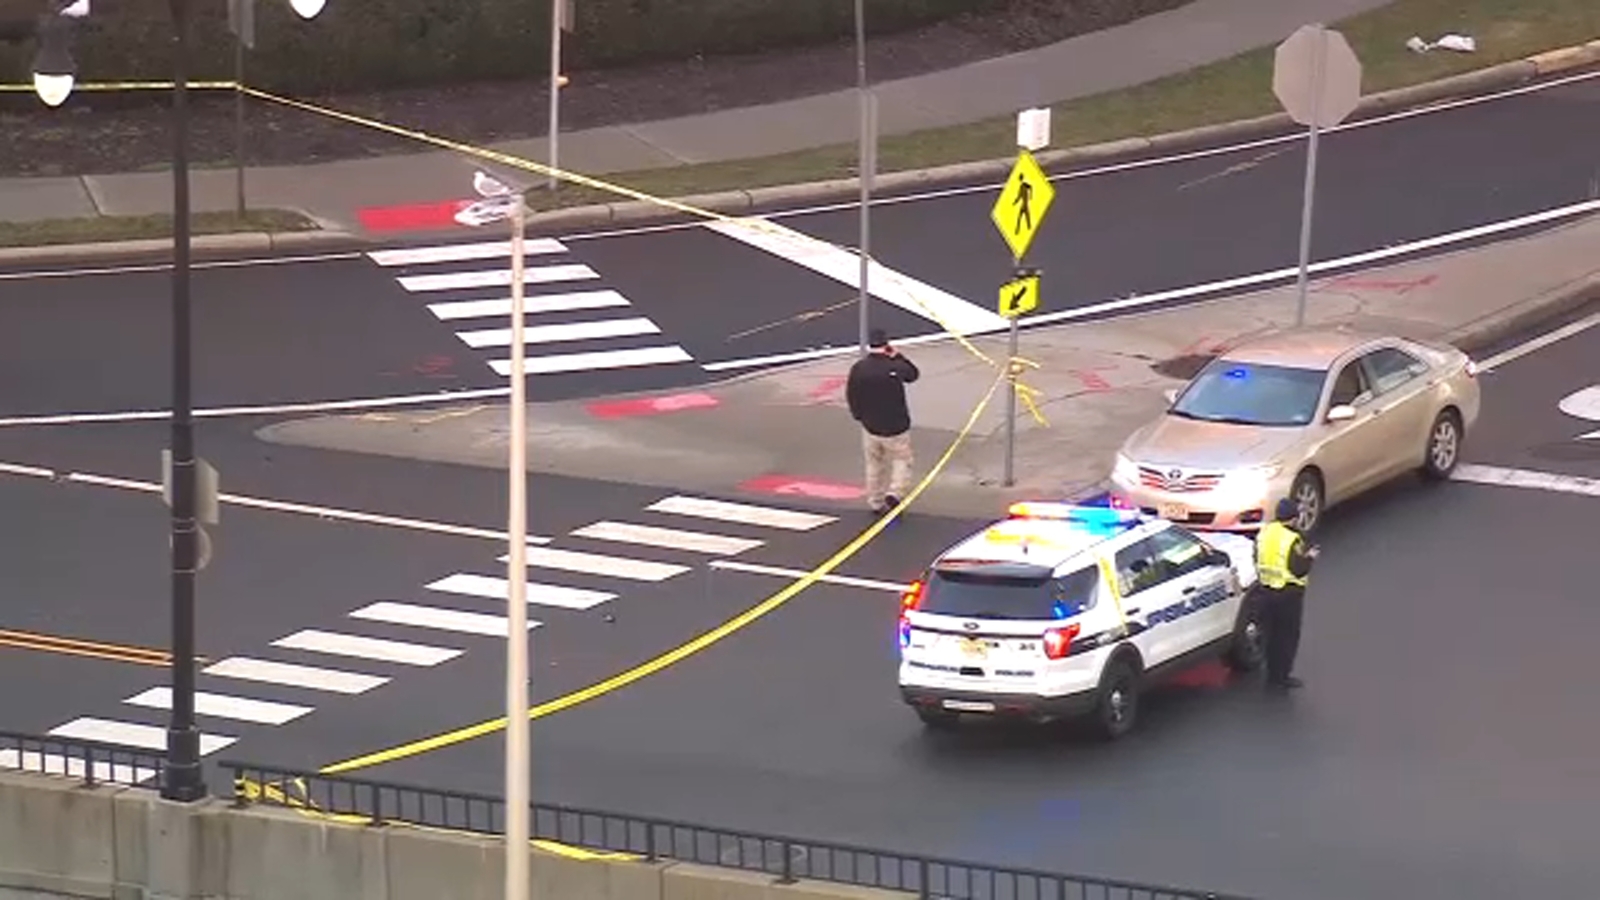 Pedestrian hit, seriously injured in Secaucus; driver detained nearby